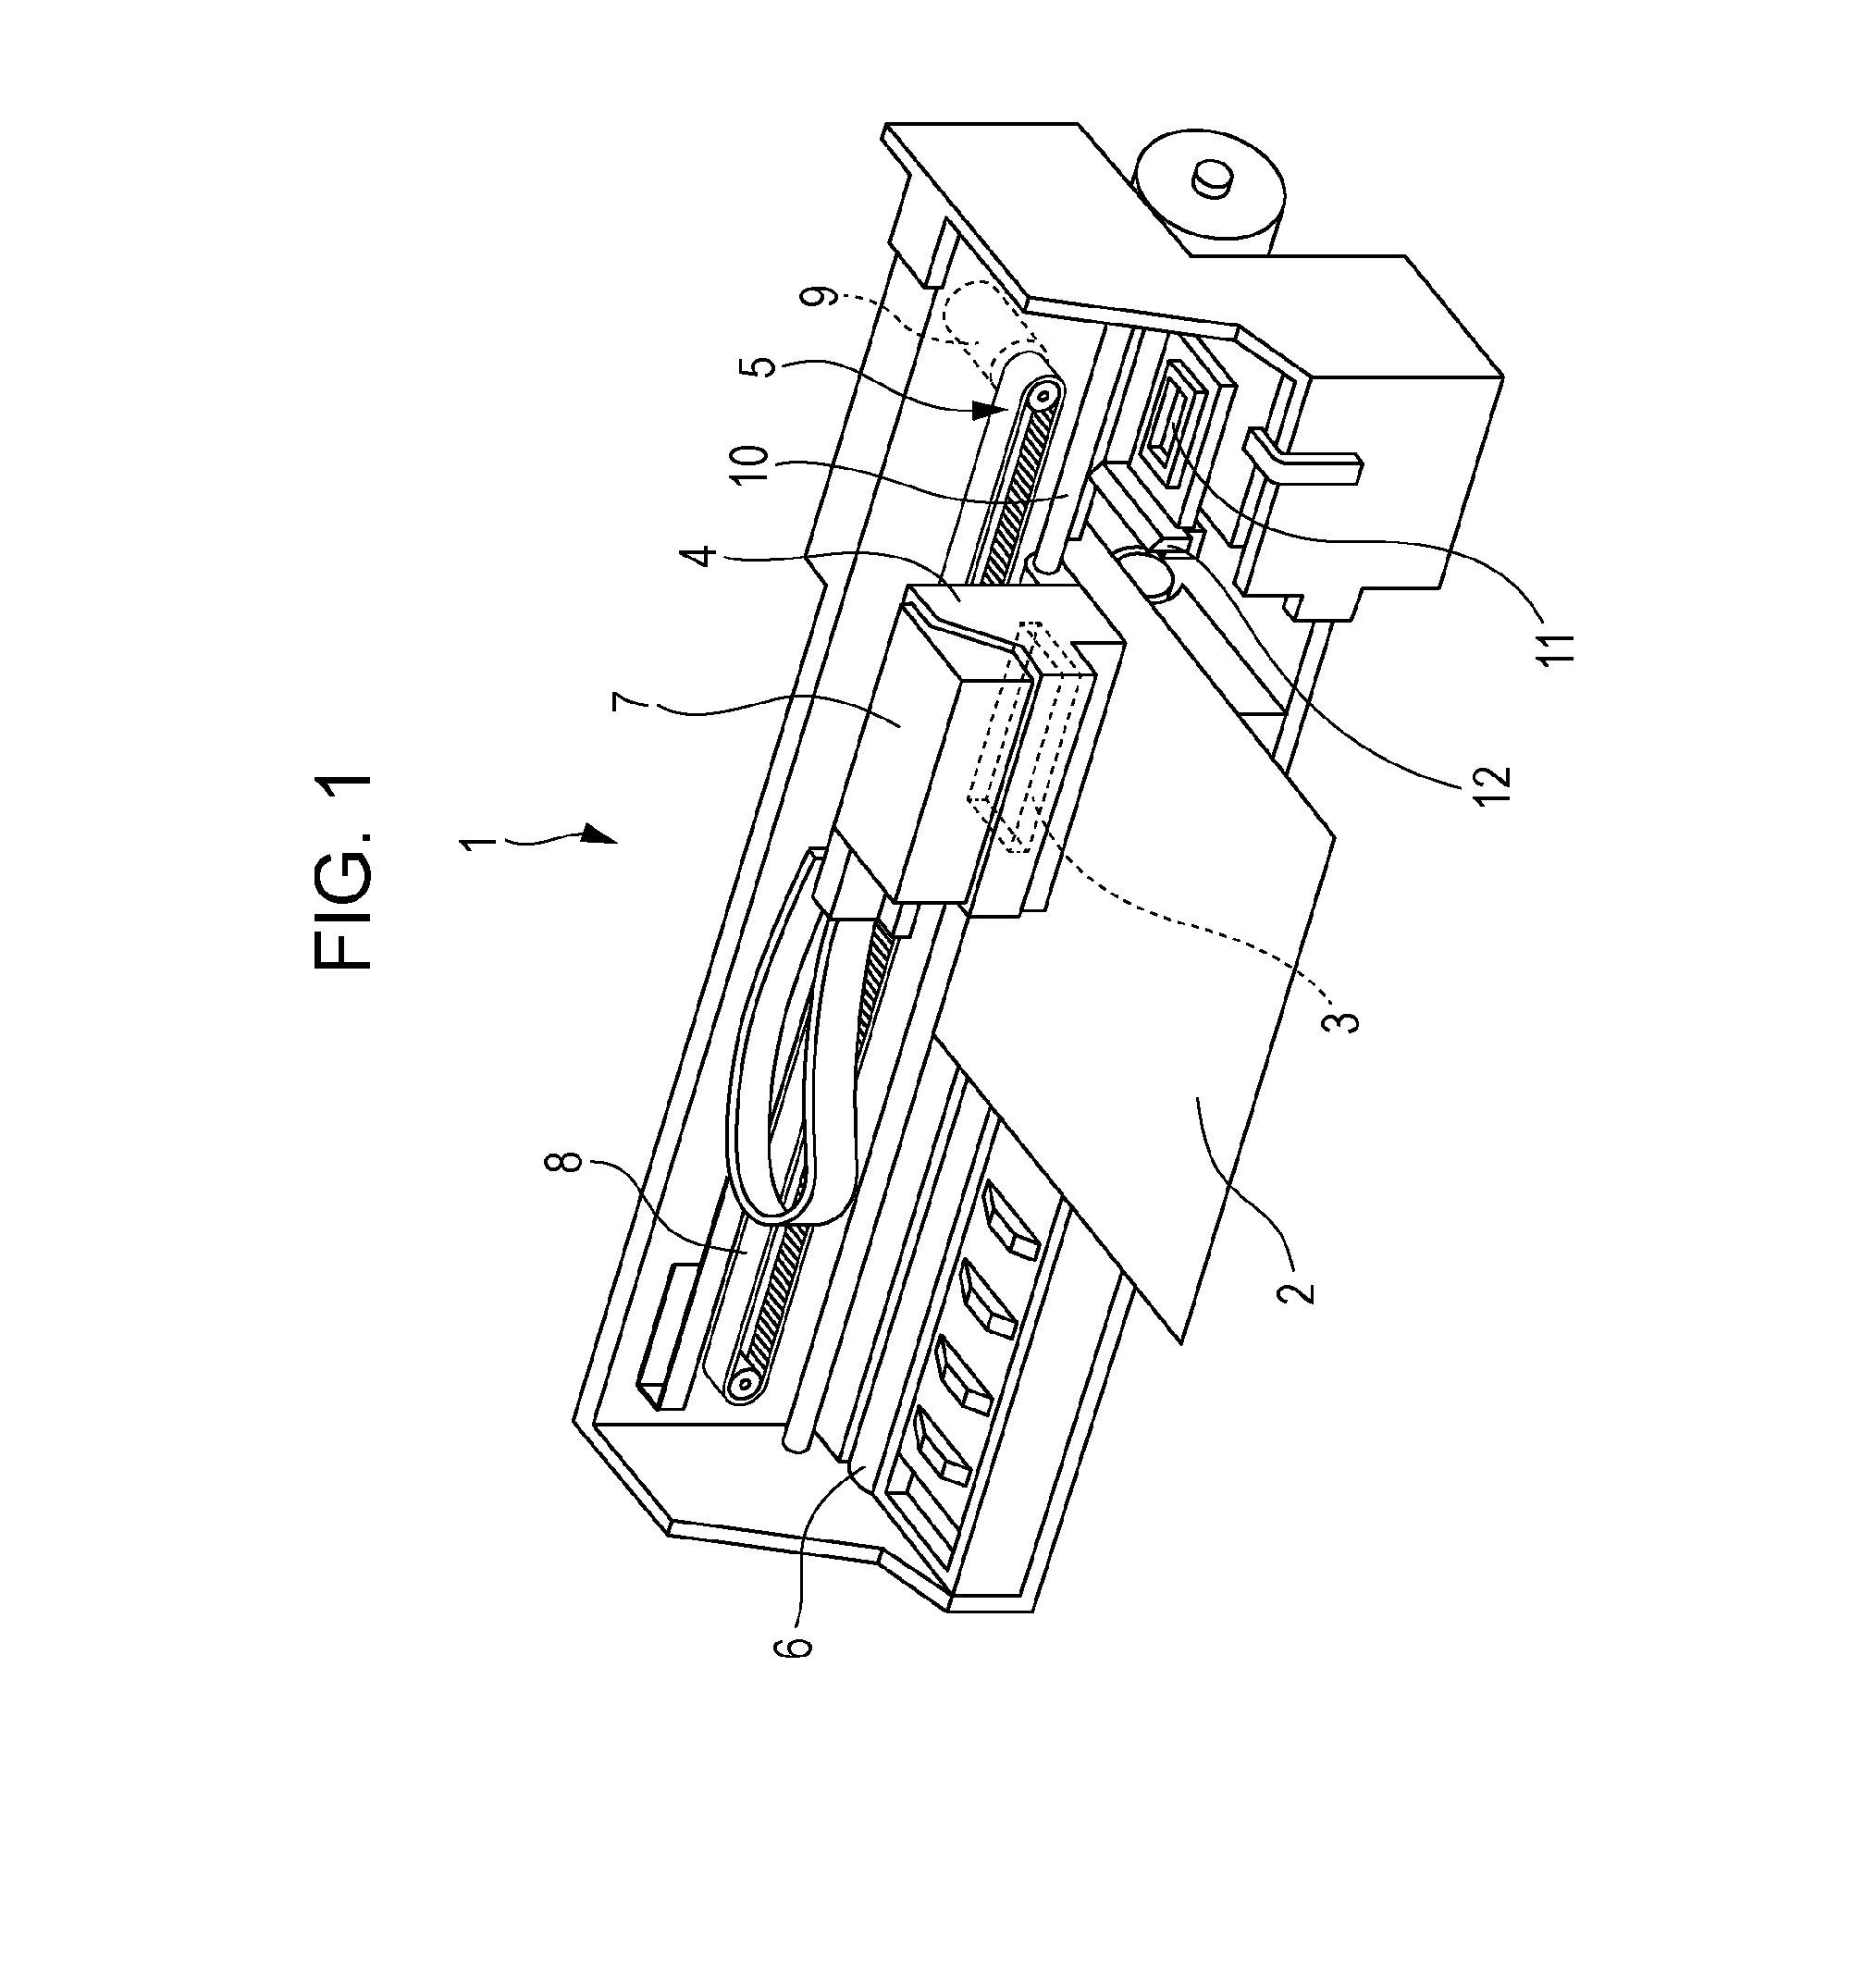 Liquid ejecting head and method of manufacturing liquid ejecting head